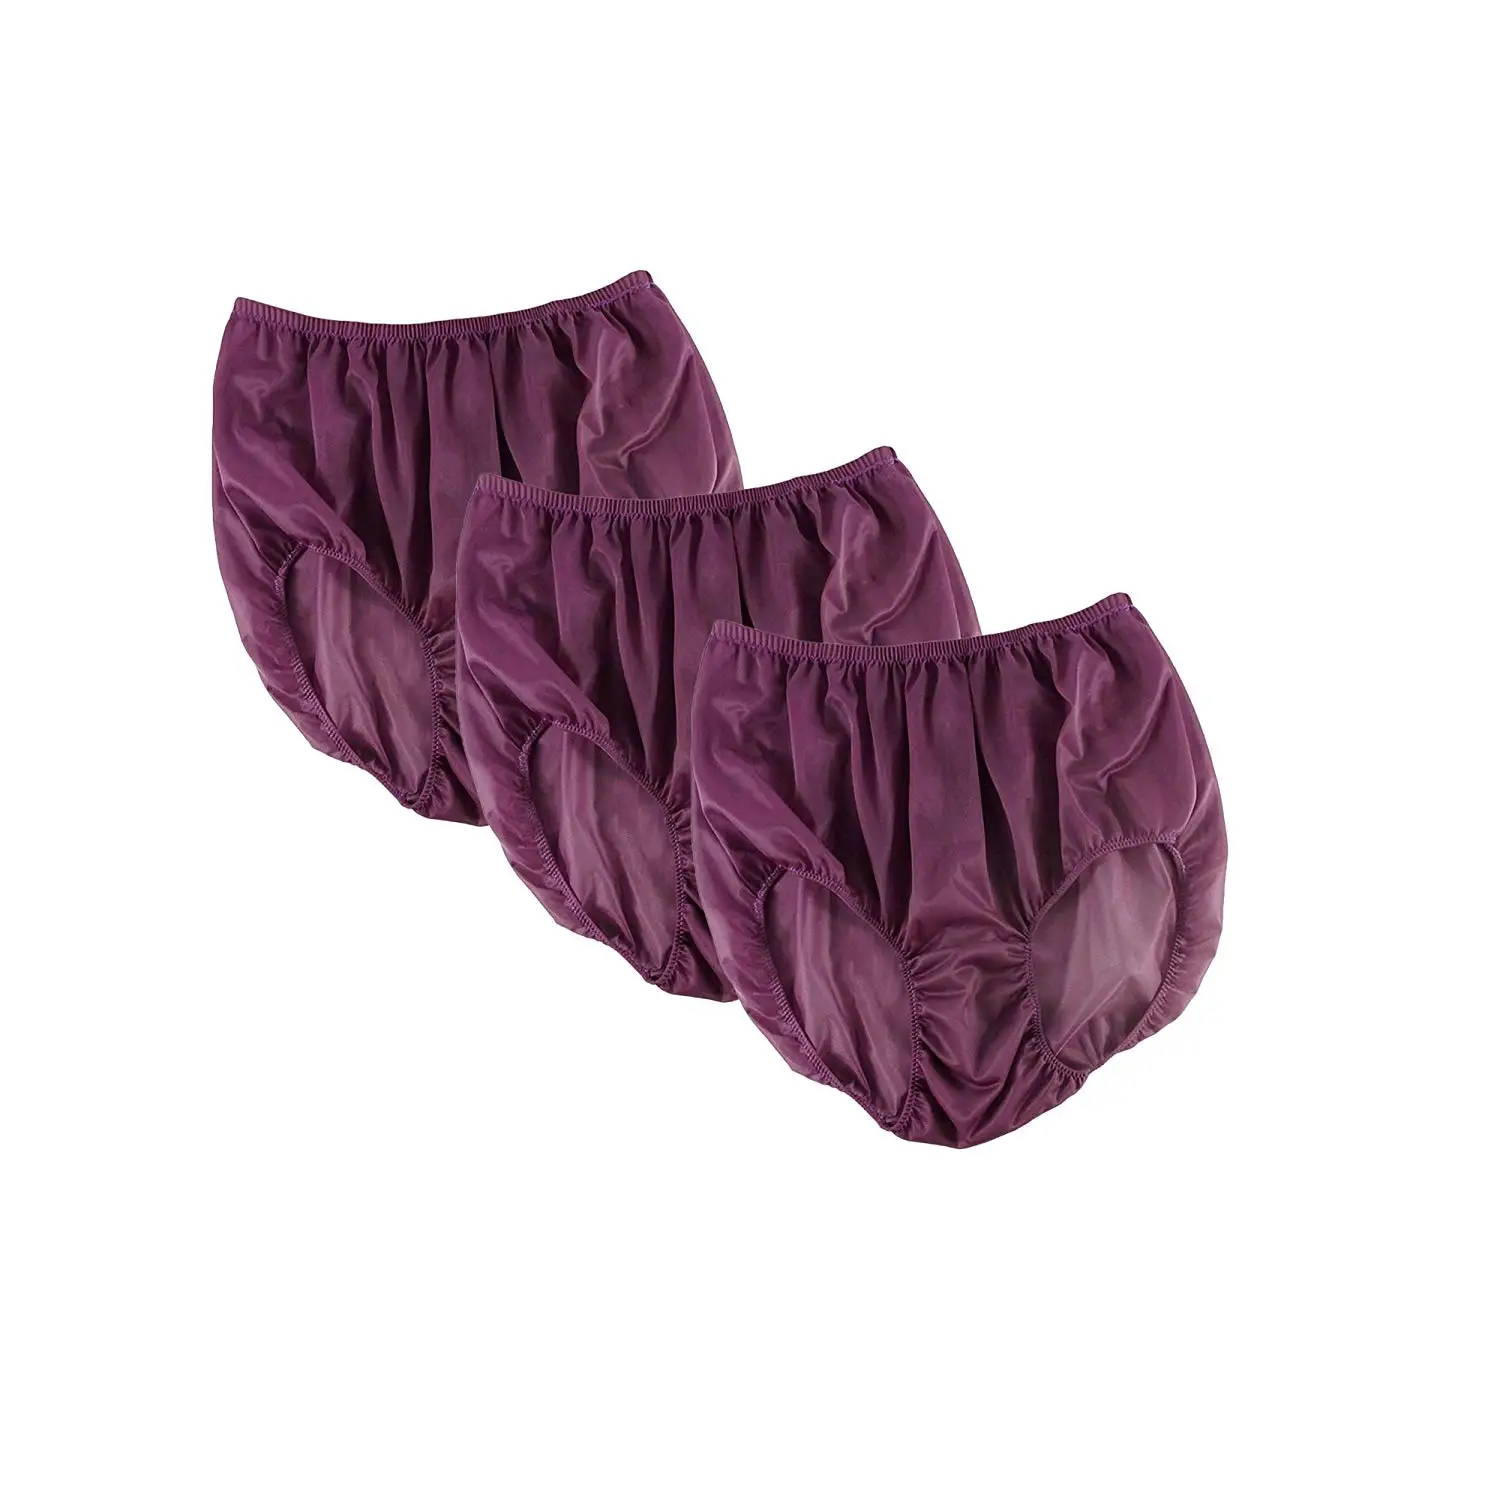 Buy Naturana Pack Of 2 Womens High Waist Panty Girdle 0053 L 4xl In